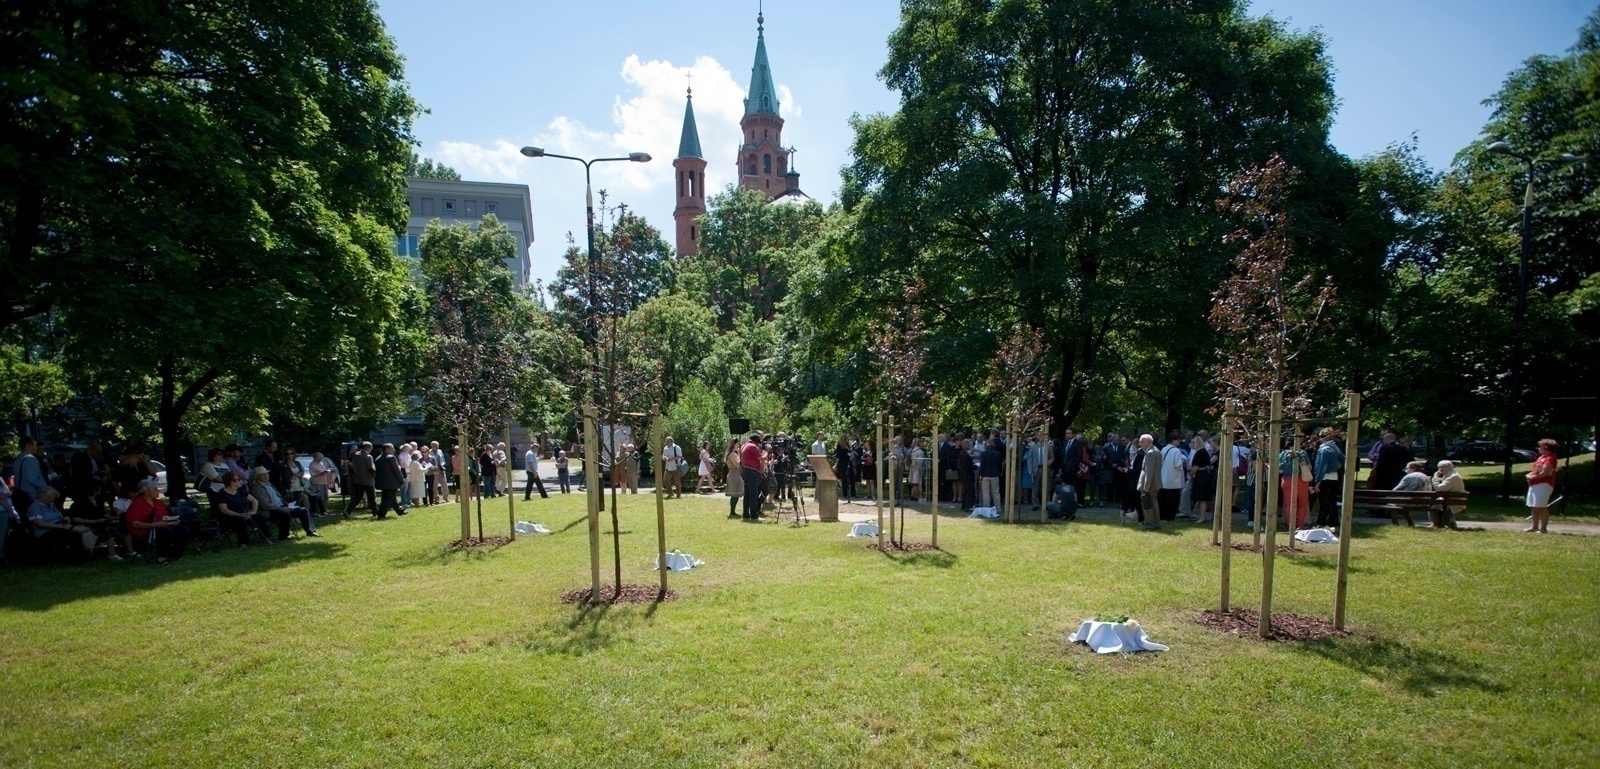 The Garden of the Righteous of Warsaw